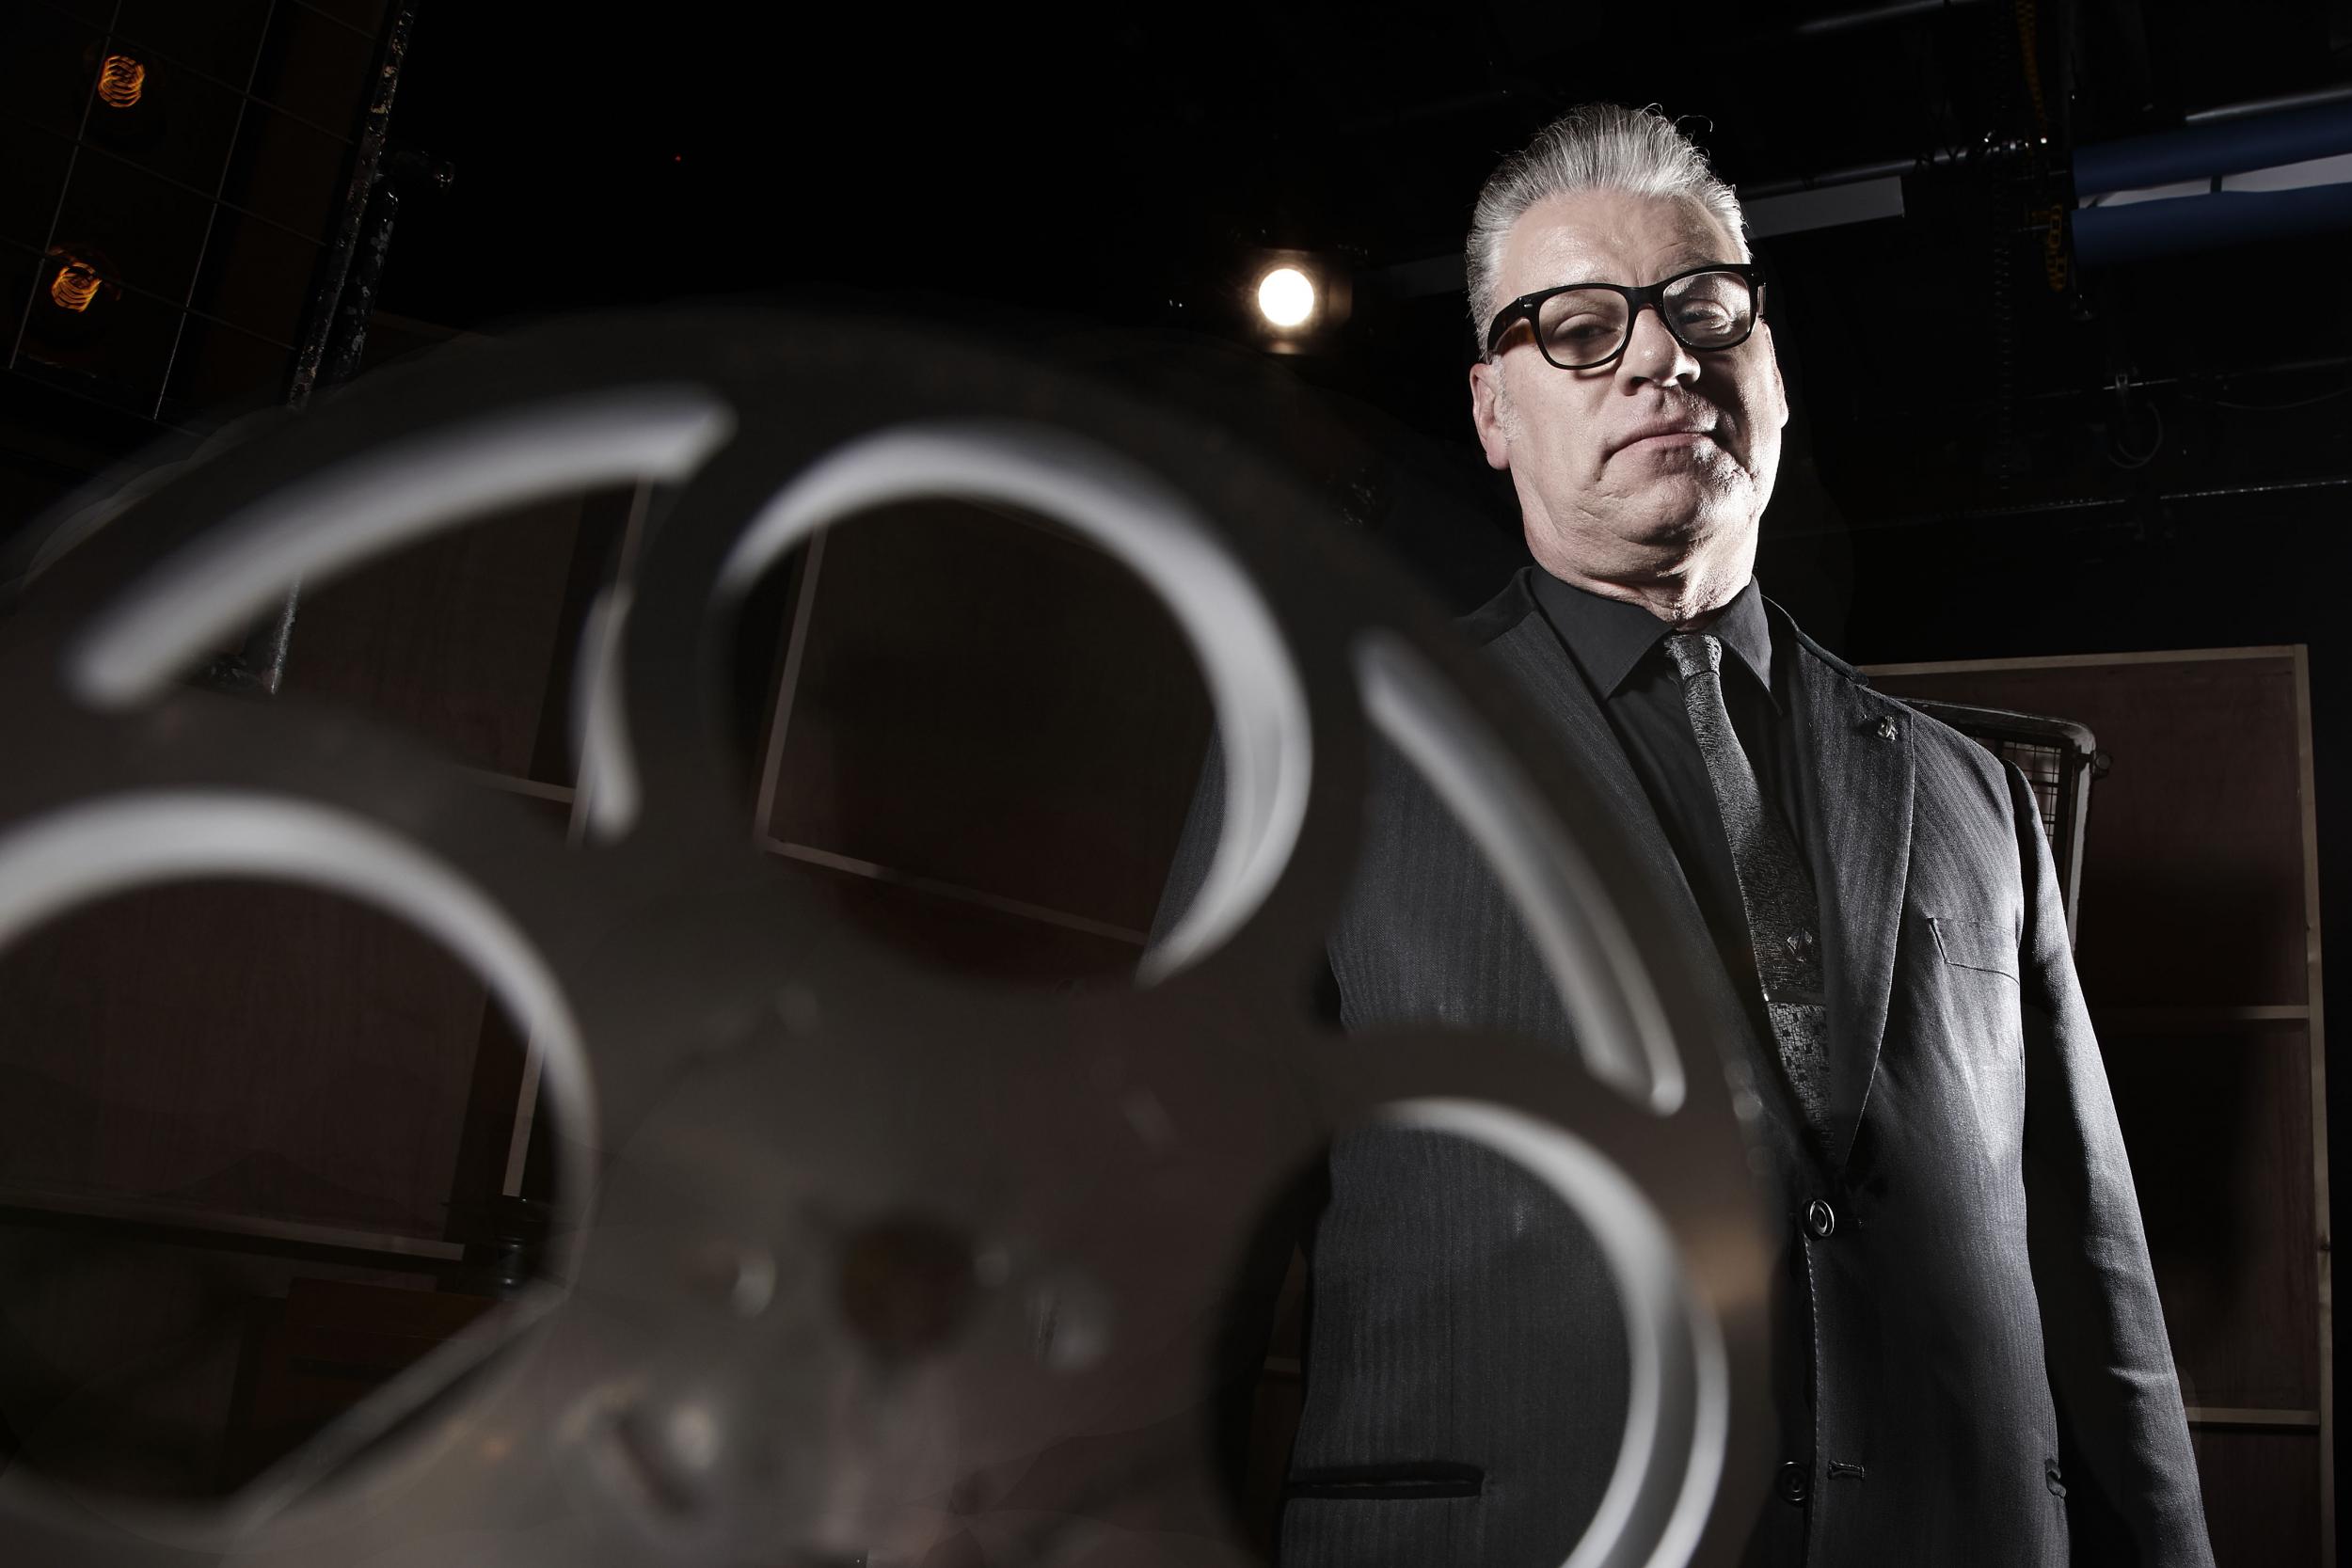 Kermode showed us every quirk and variation imaginable in a heist movie